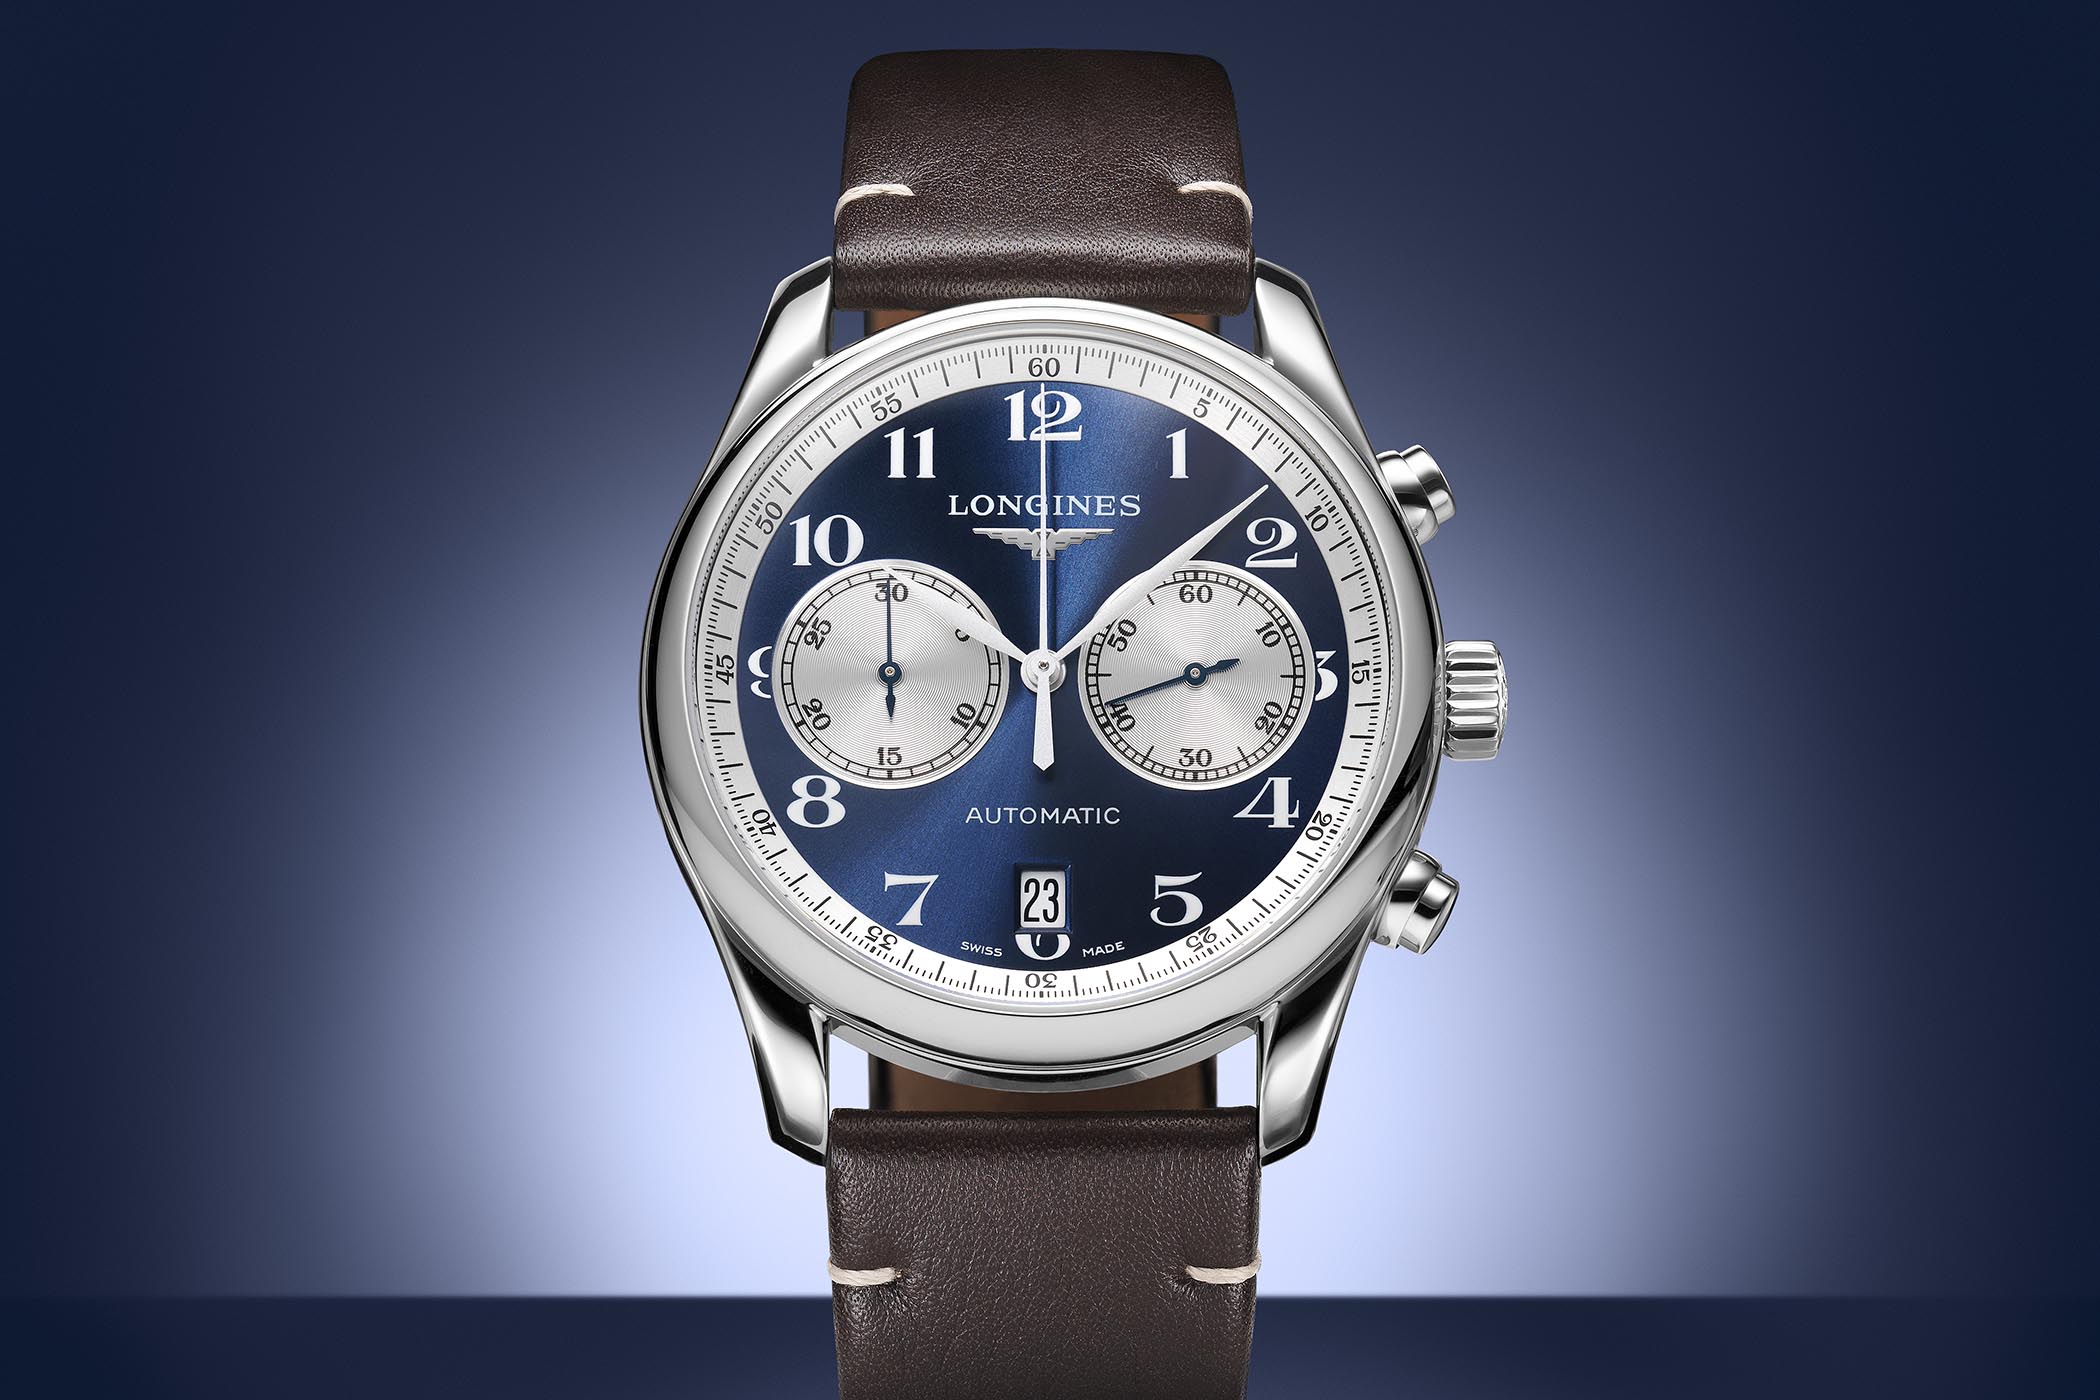 Introducing The Longines Master Collection Chronograph Bucherer Blue Edition Watch